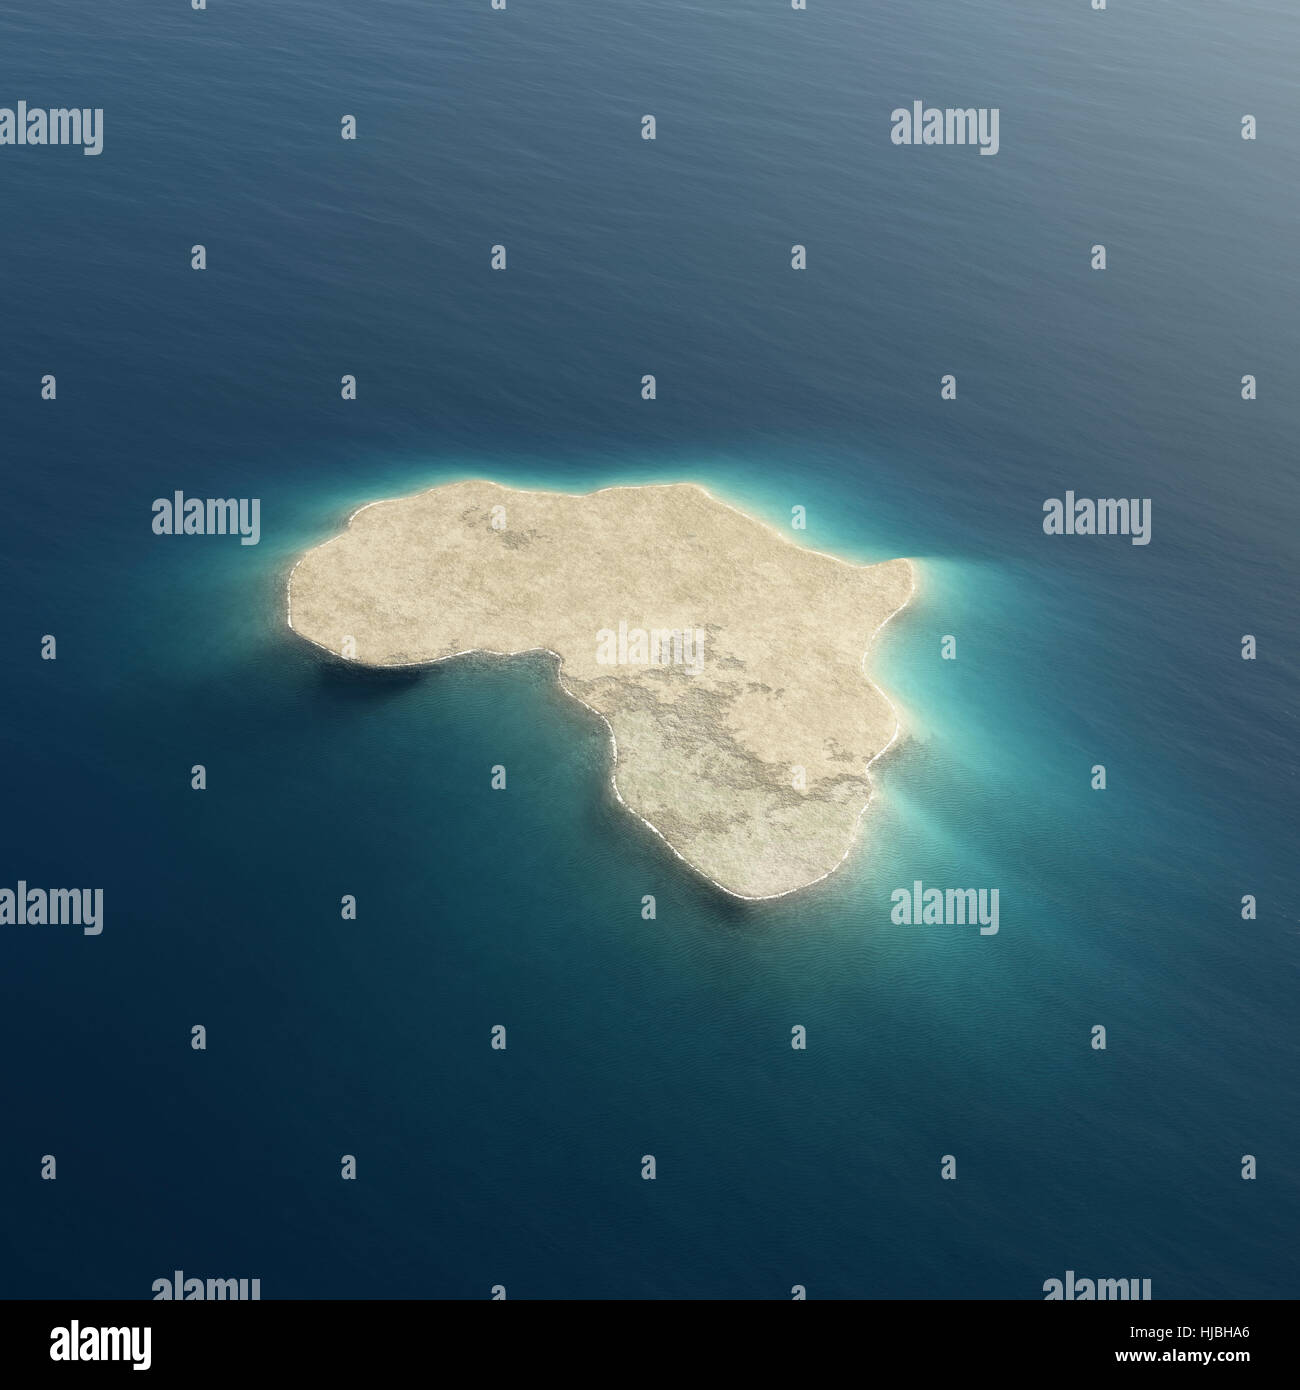 Africa illustrated as an island surrounded by tropical blue ocean water. Conceptual 3D background image for use in designs Stock Photo